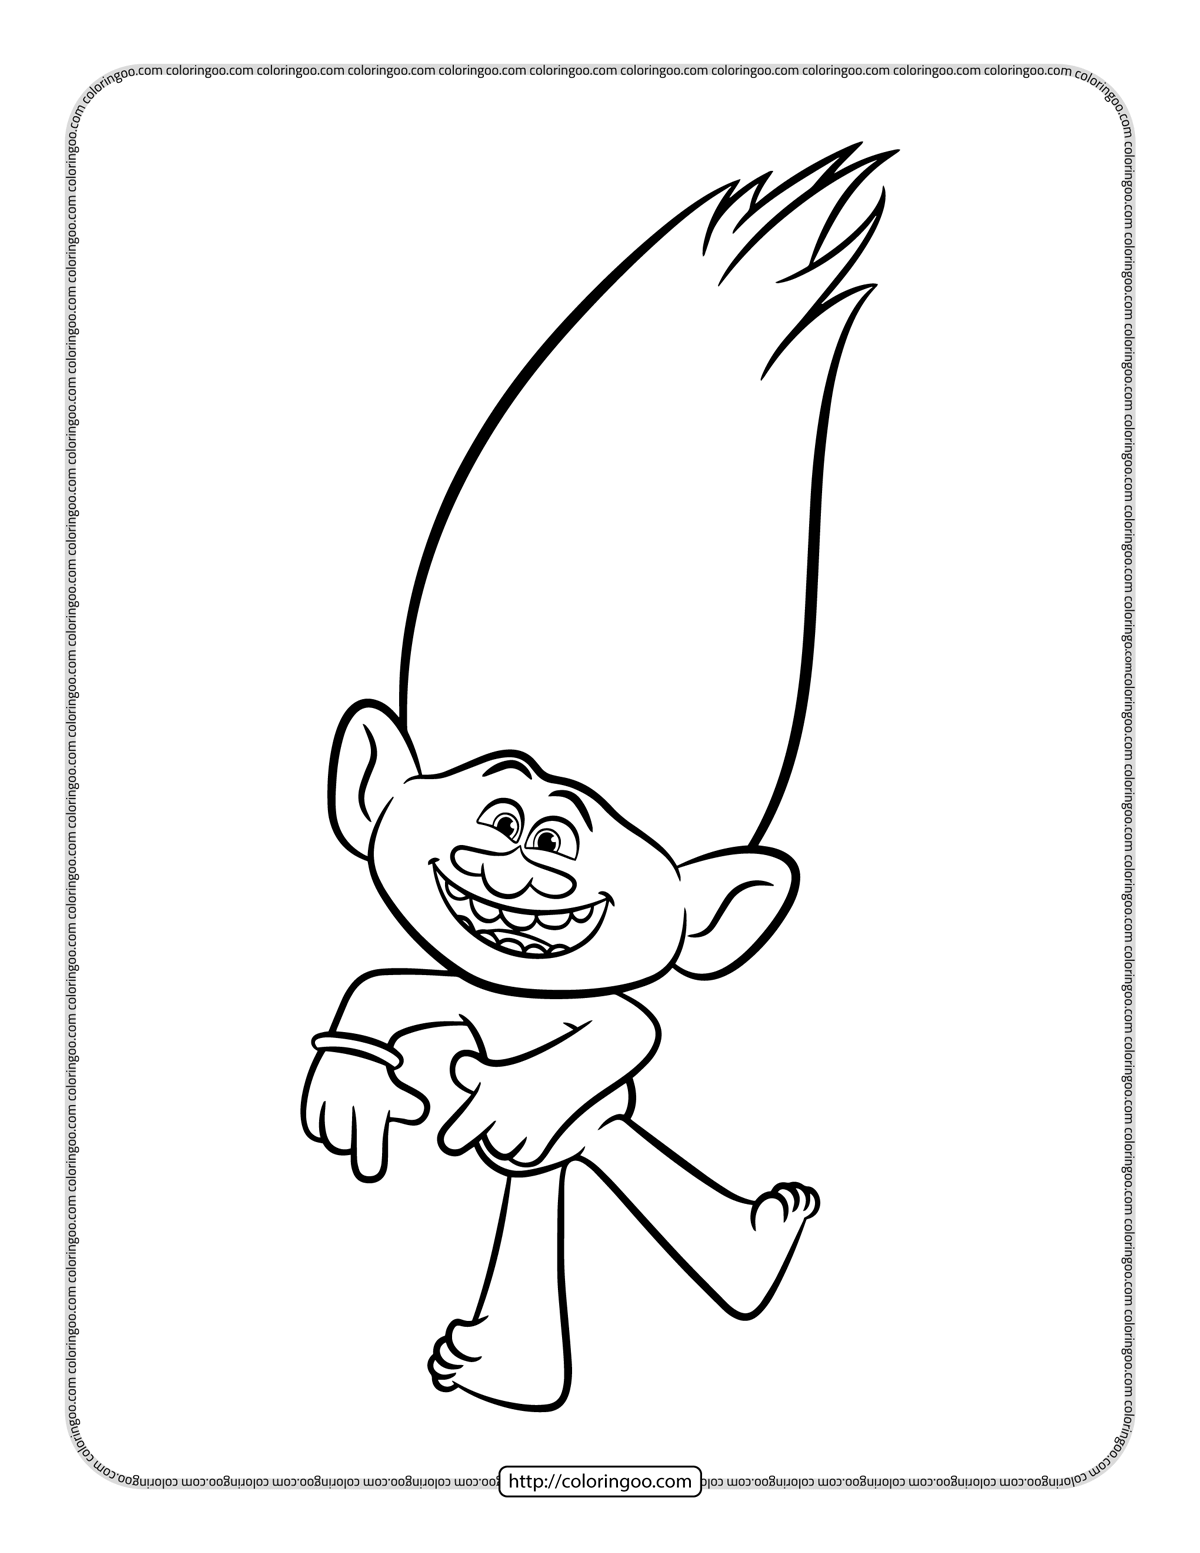 guy diamond dancing pdf coloring pages